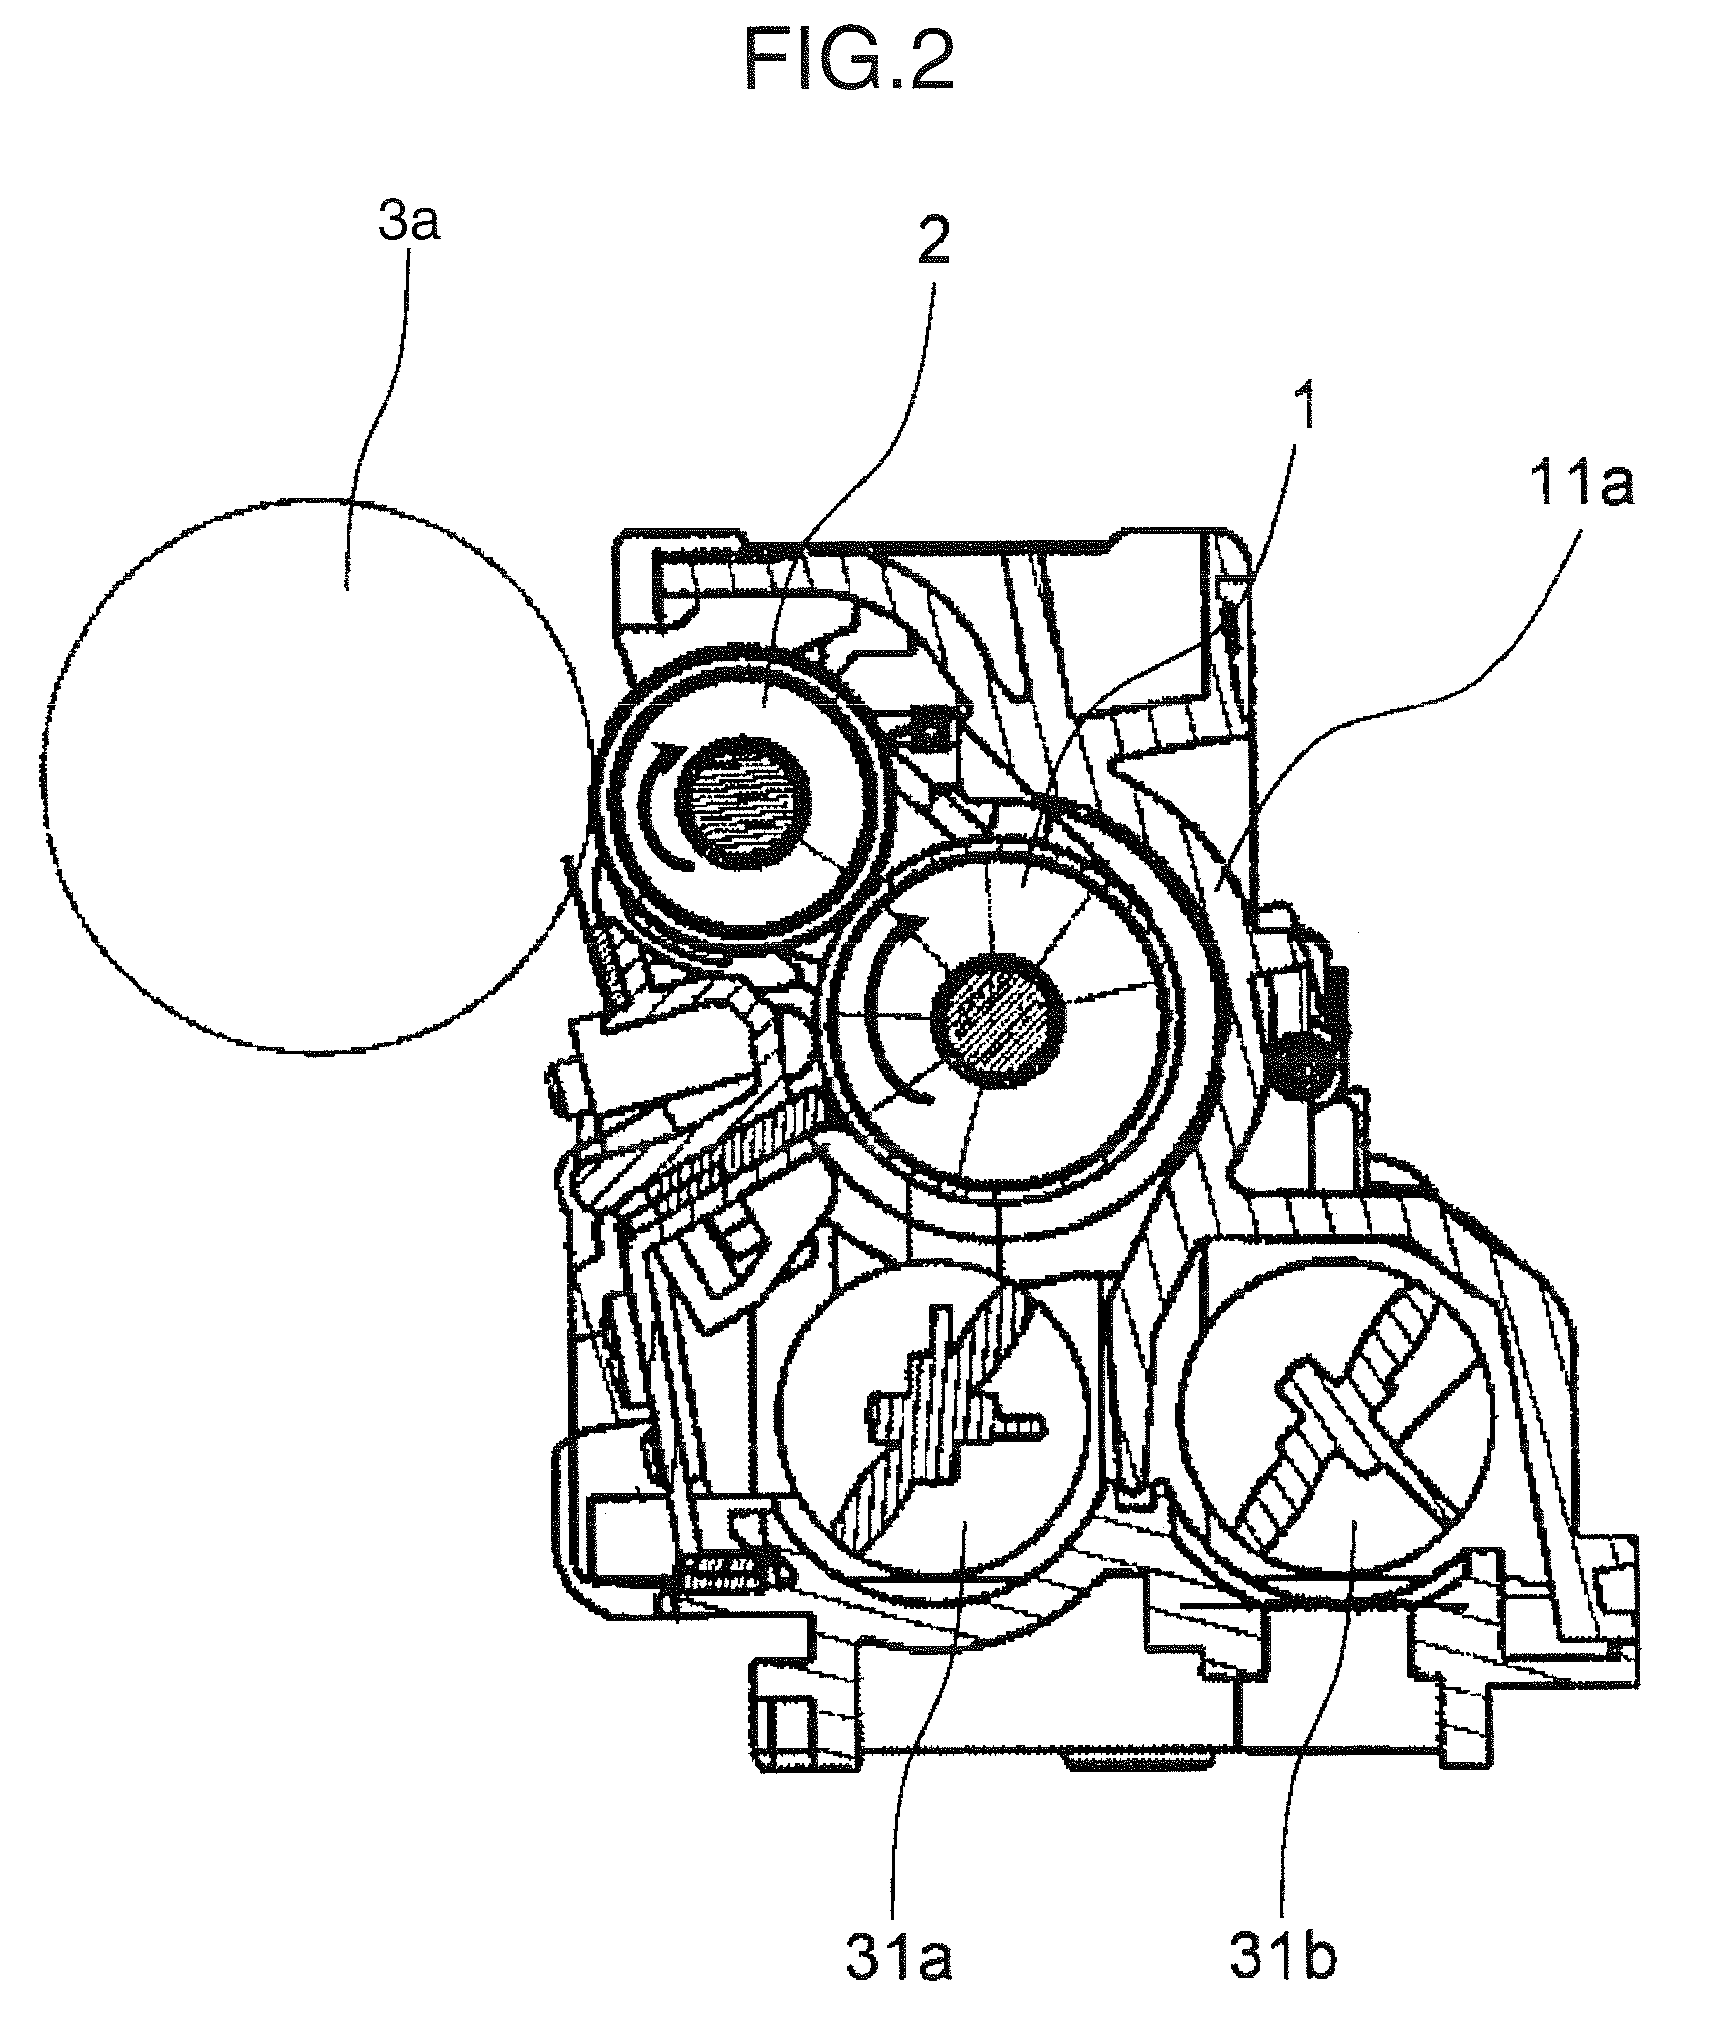 Image forming apparatus with controlled application of alternating-current bias